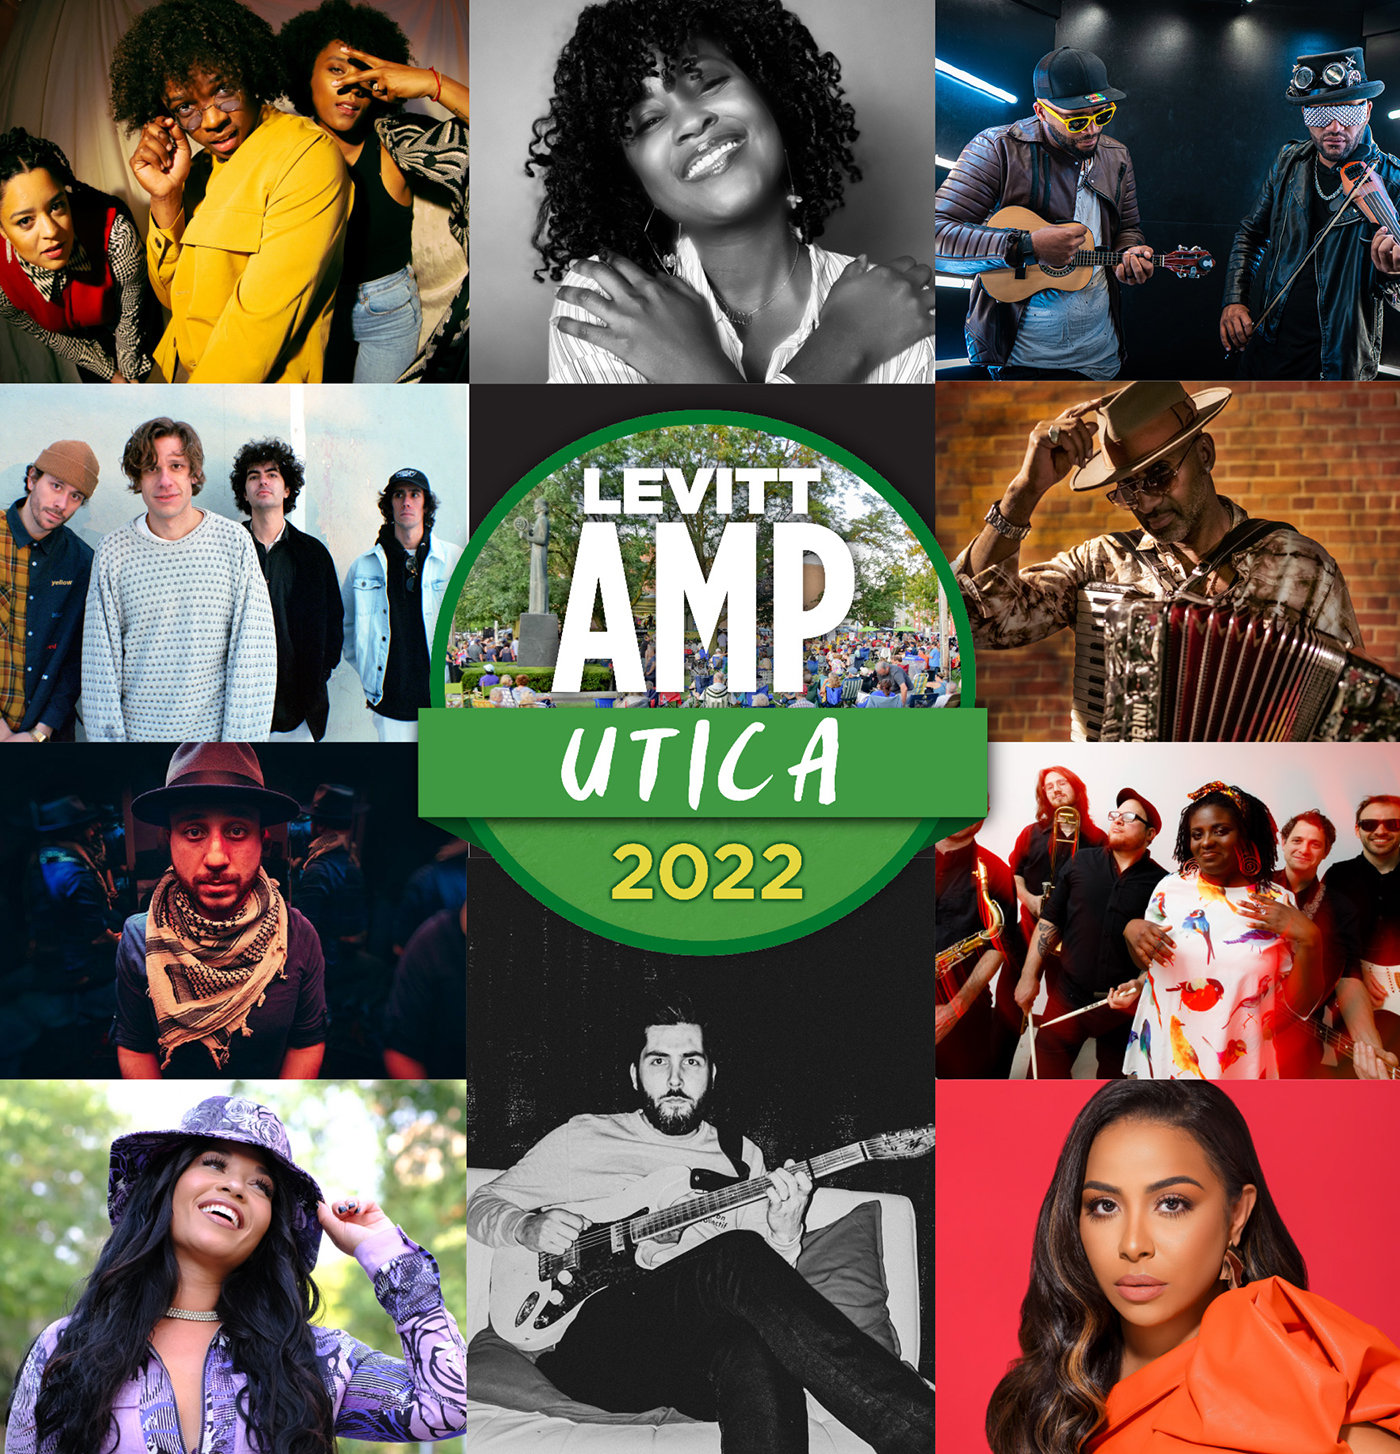 A marketing collage of upcoming acts to perform as part of the Levitt AMP Utica Music Series in Utica has been released by program organizers. The Levitt AMP Utica Music Series returns this year for its sixth season with family-friendly, free outdoor concerts at Kopernik Park in Oneida Square.